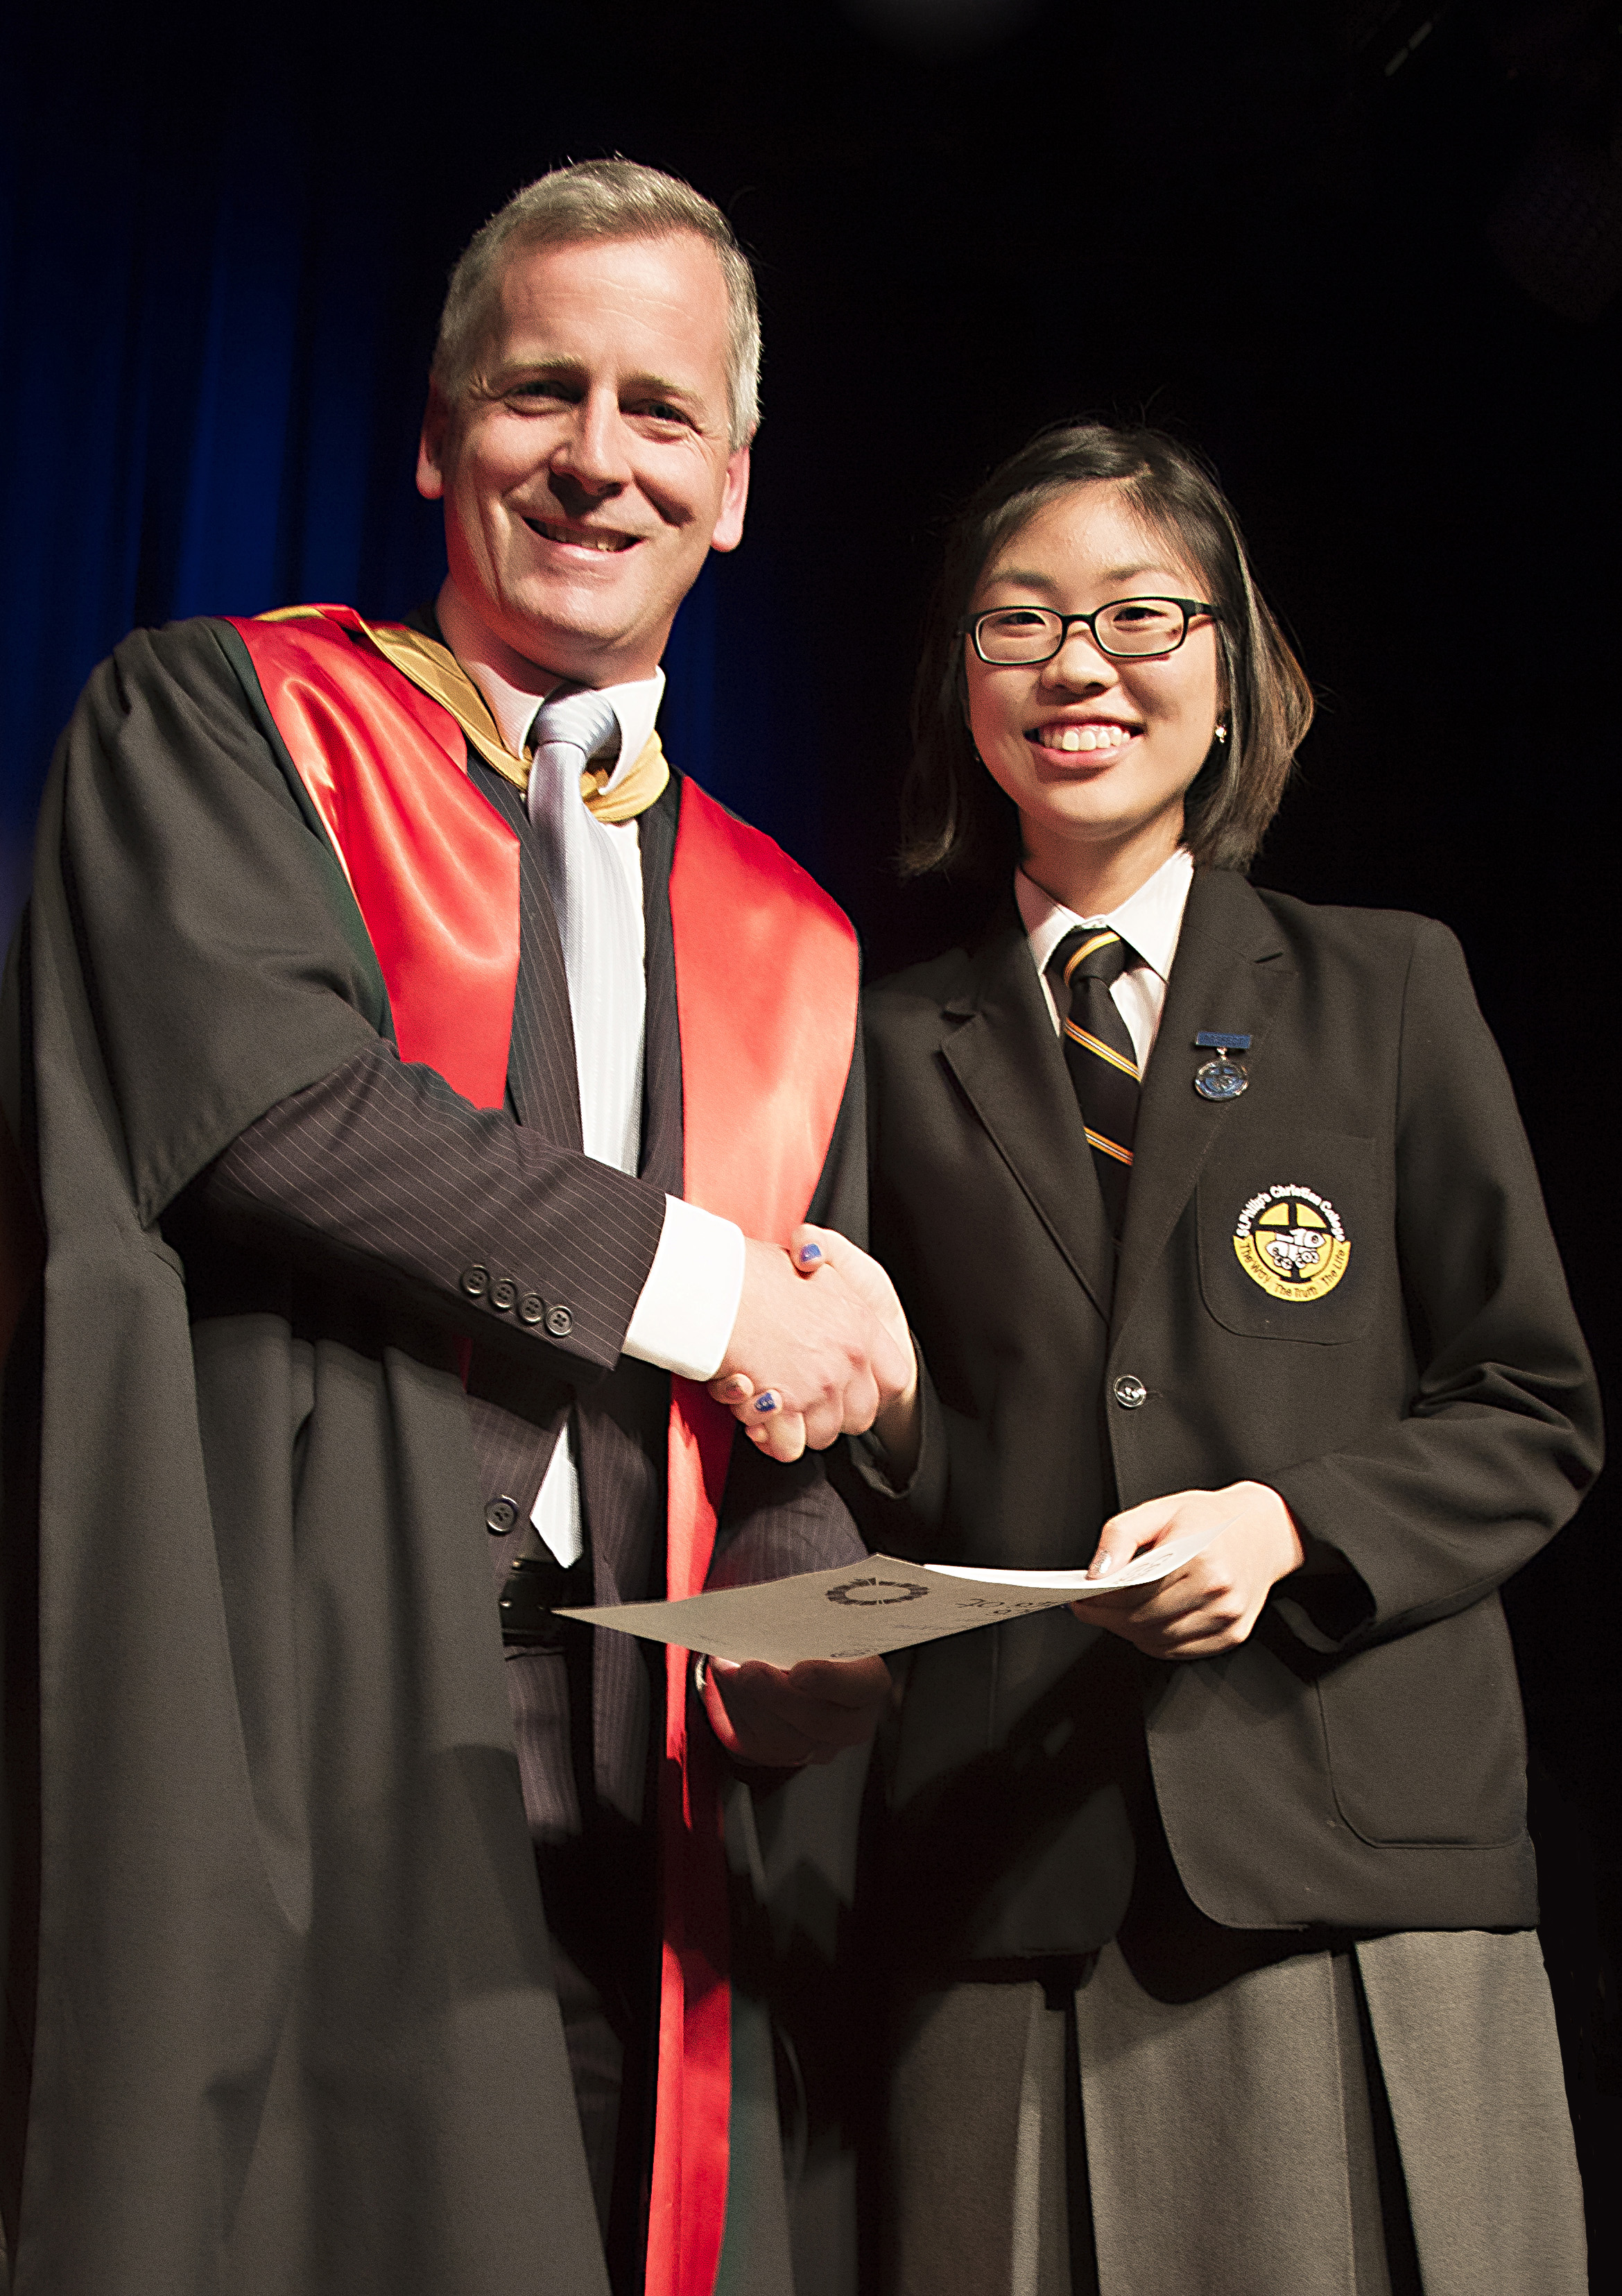 Grace Kim receiving her 2016 Dux Award from Principal Dr Pettersen.  Photo supplied by St Philip’s Christian College.